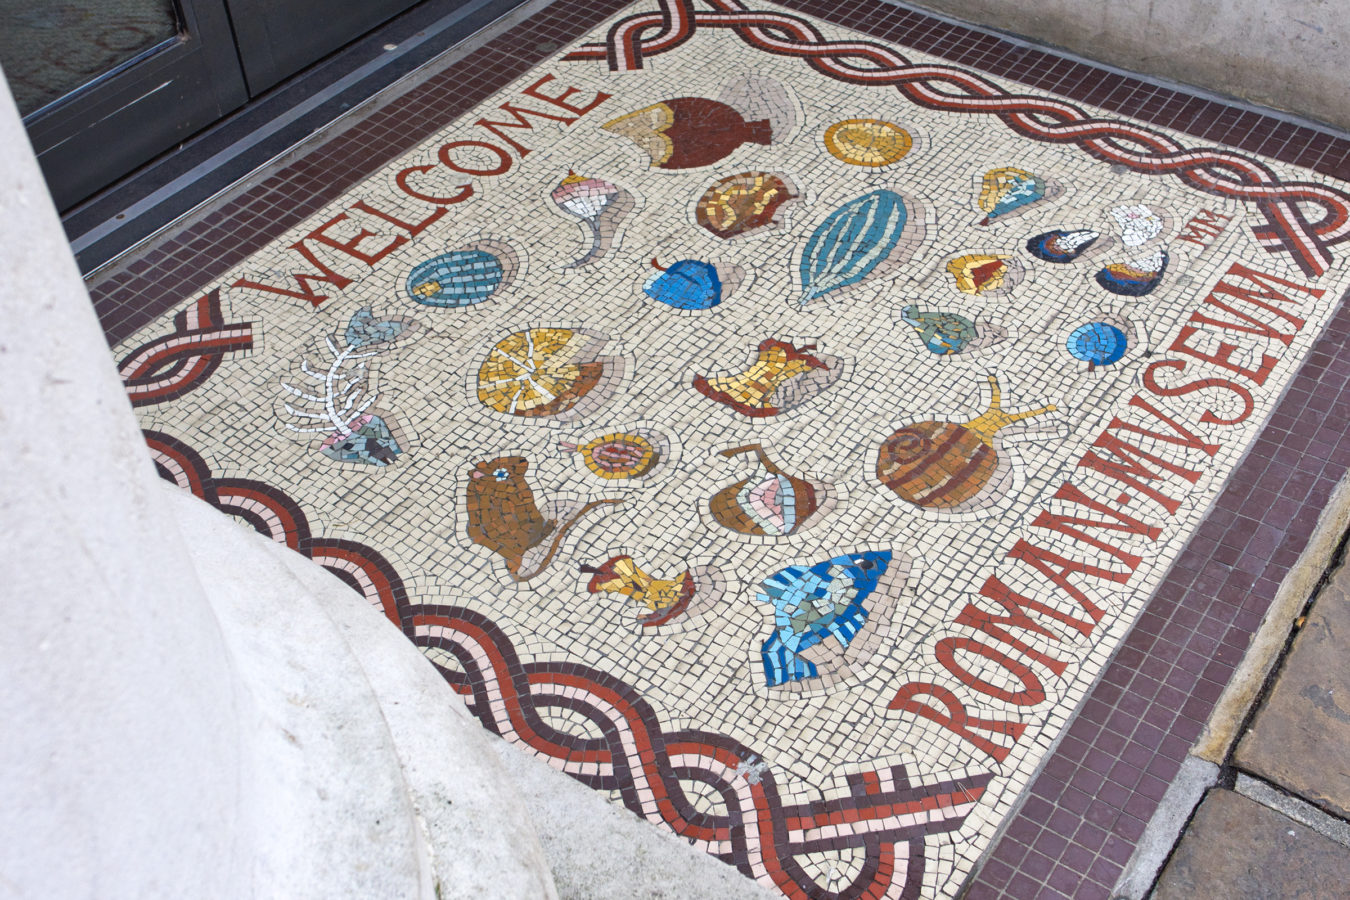 Floor mosaic outside the museum that says 'Welcome - Roman Museum'